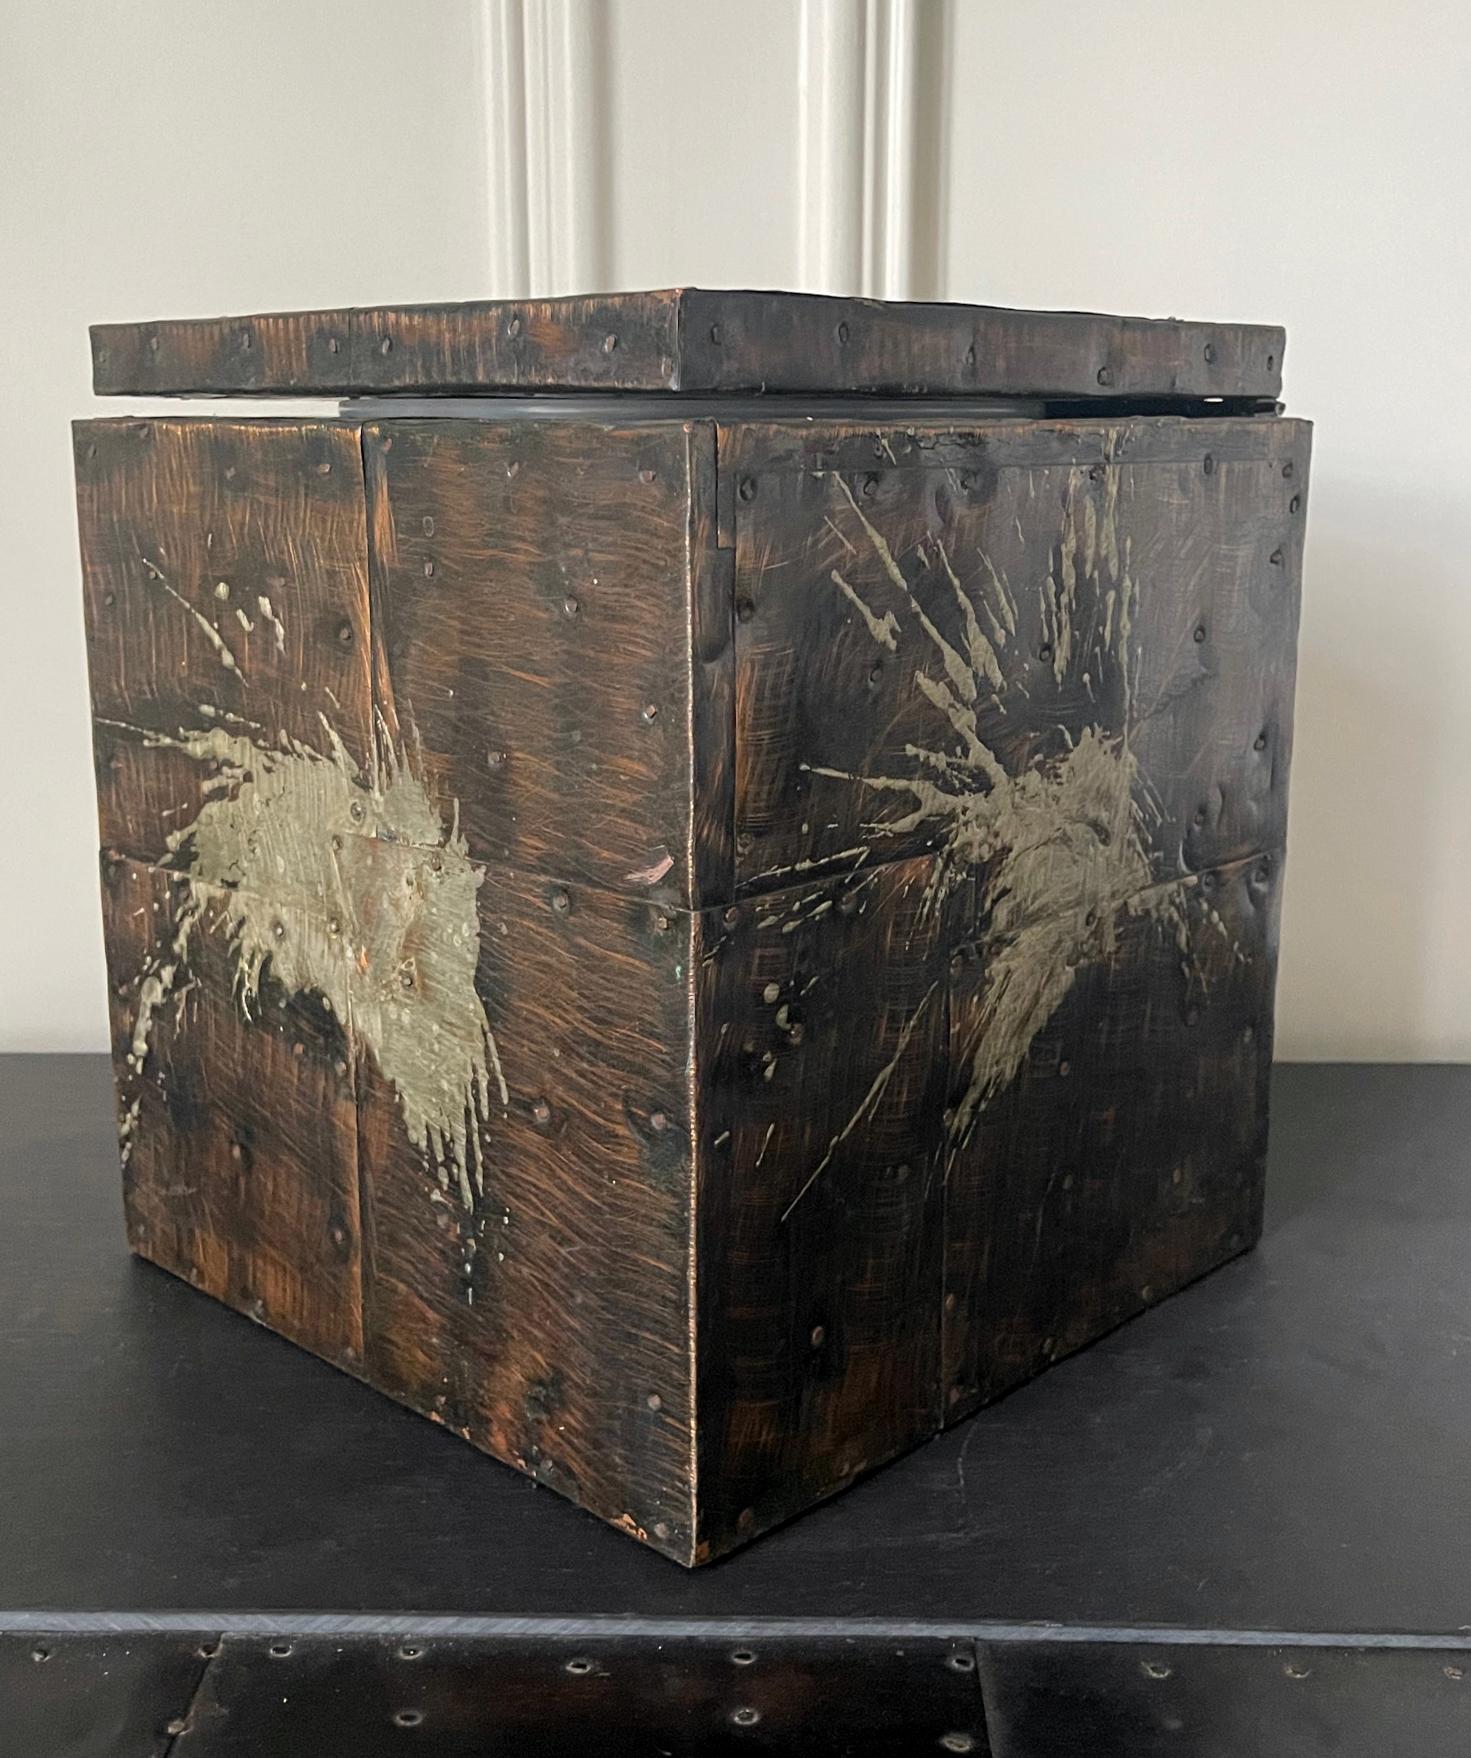 A cube form desktop box covered with patchwork copper by American artist and designer Paul Evans (1931-1987). The lidded box has a plastic insert box and was made as an ice box or a wine cooler. The iconic surface showcases the metal sheet patchwork